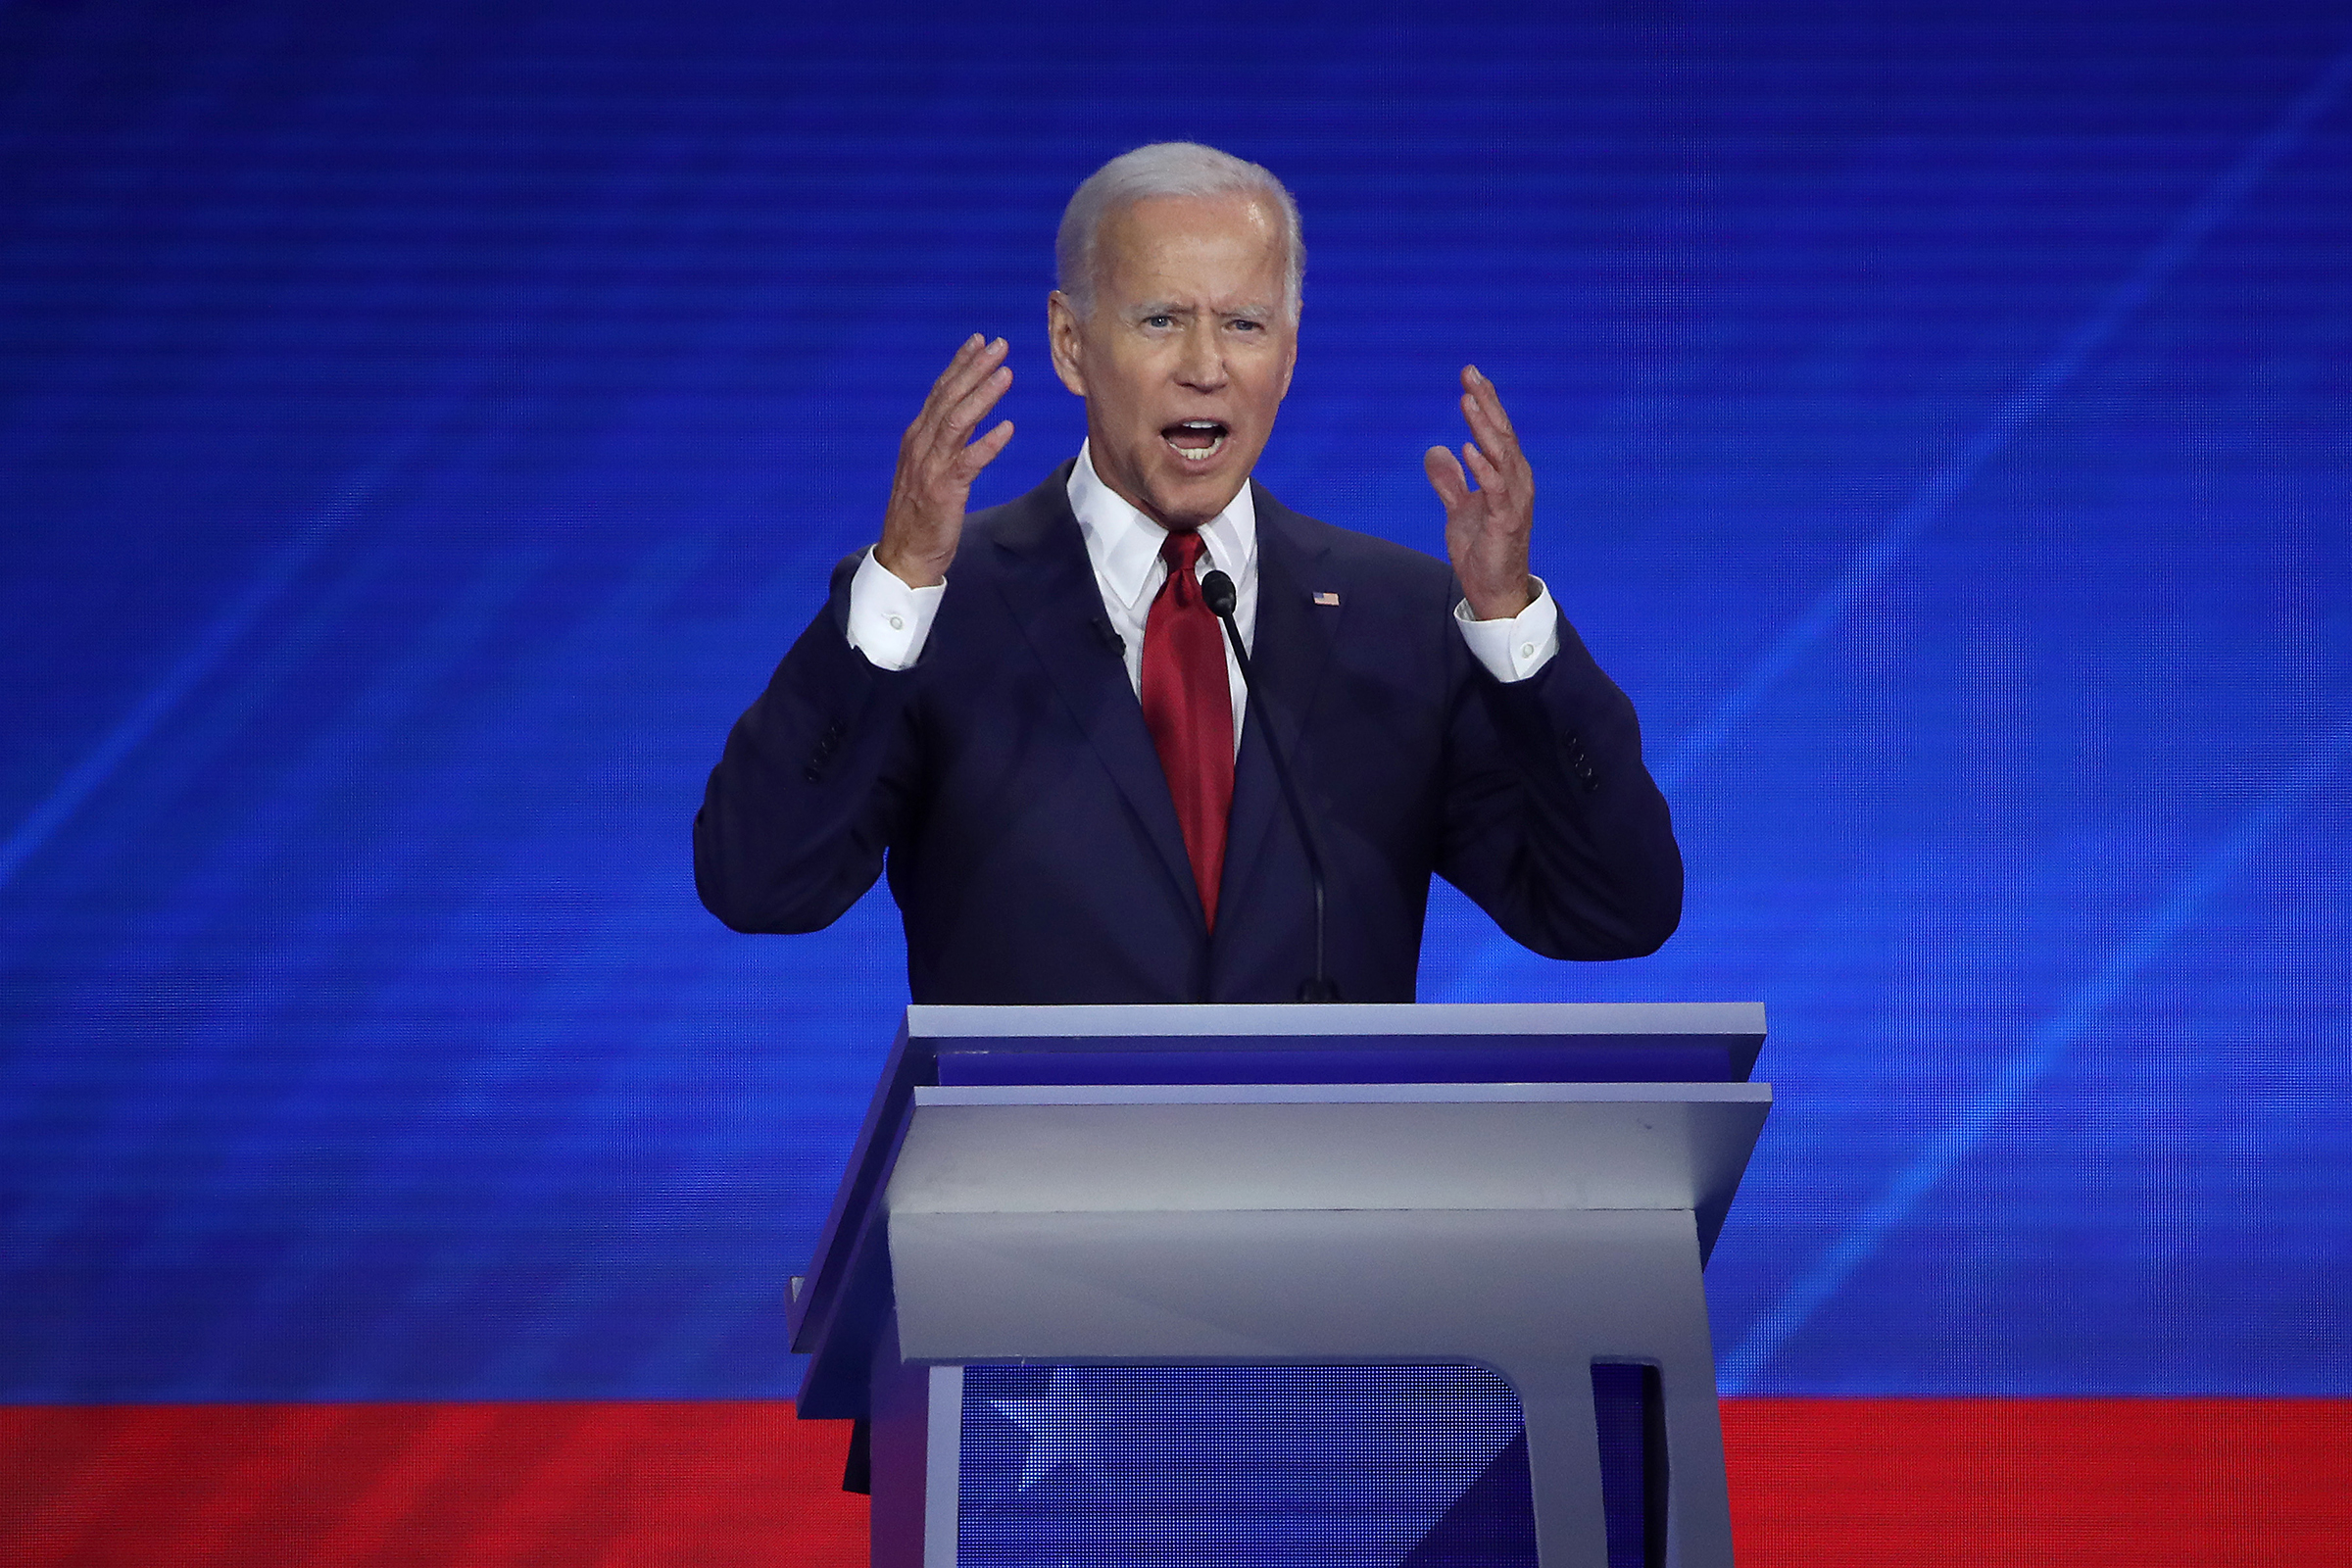 Democratic presidential candidate former Vice President Joe Biden speaks during the Democratic Presidential Debate at Texas Southern University's Health and PE Center on September 12, 2019 in Houston, Texas. (Win McNamee—Getty Images)